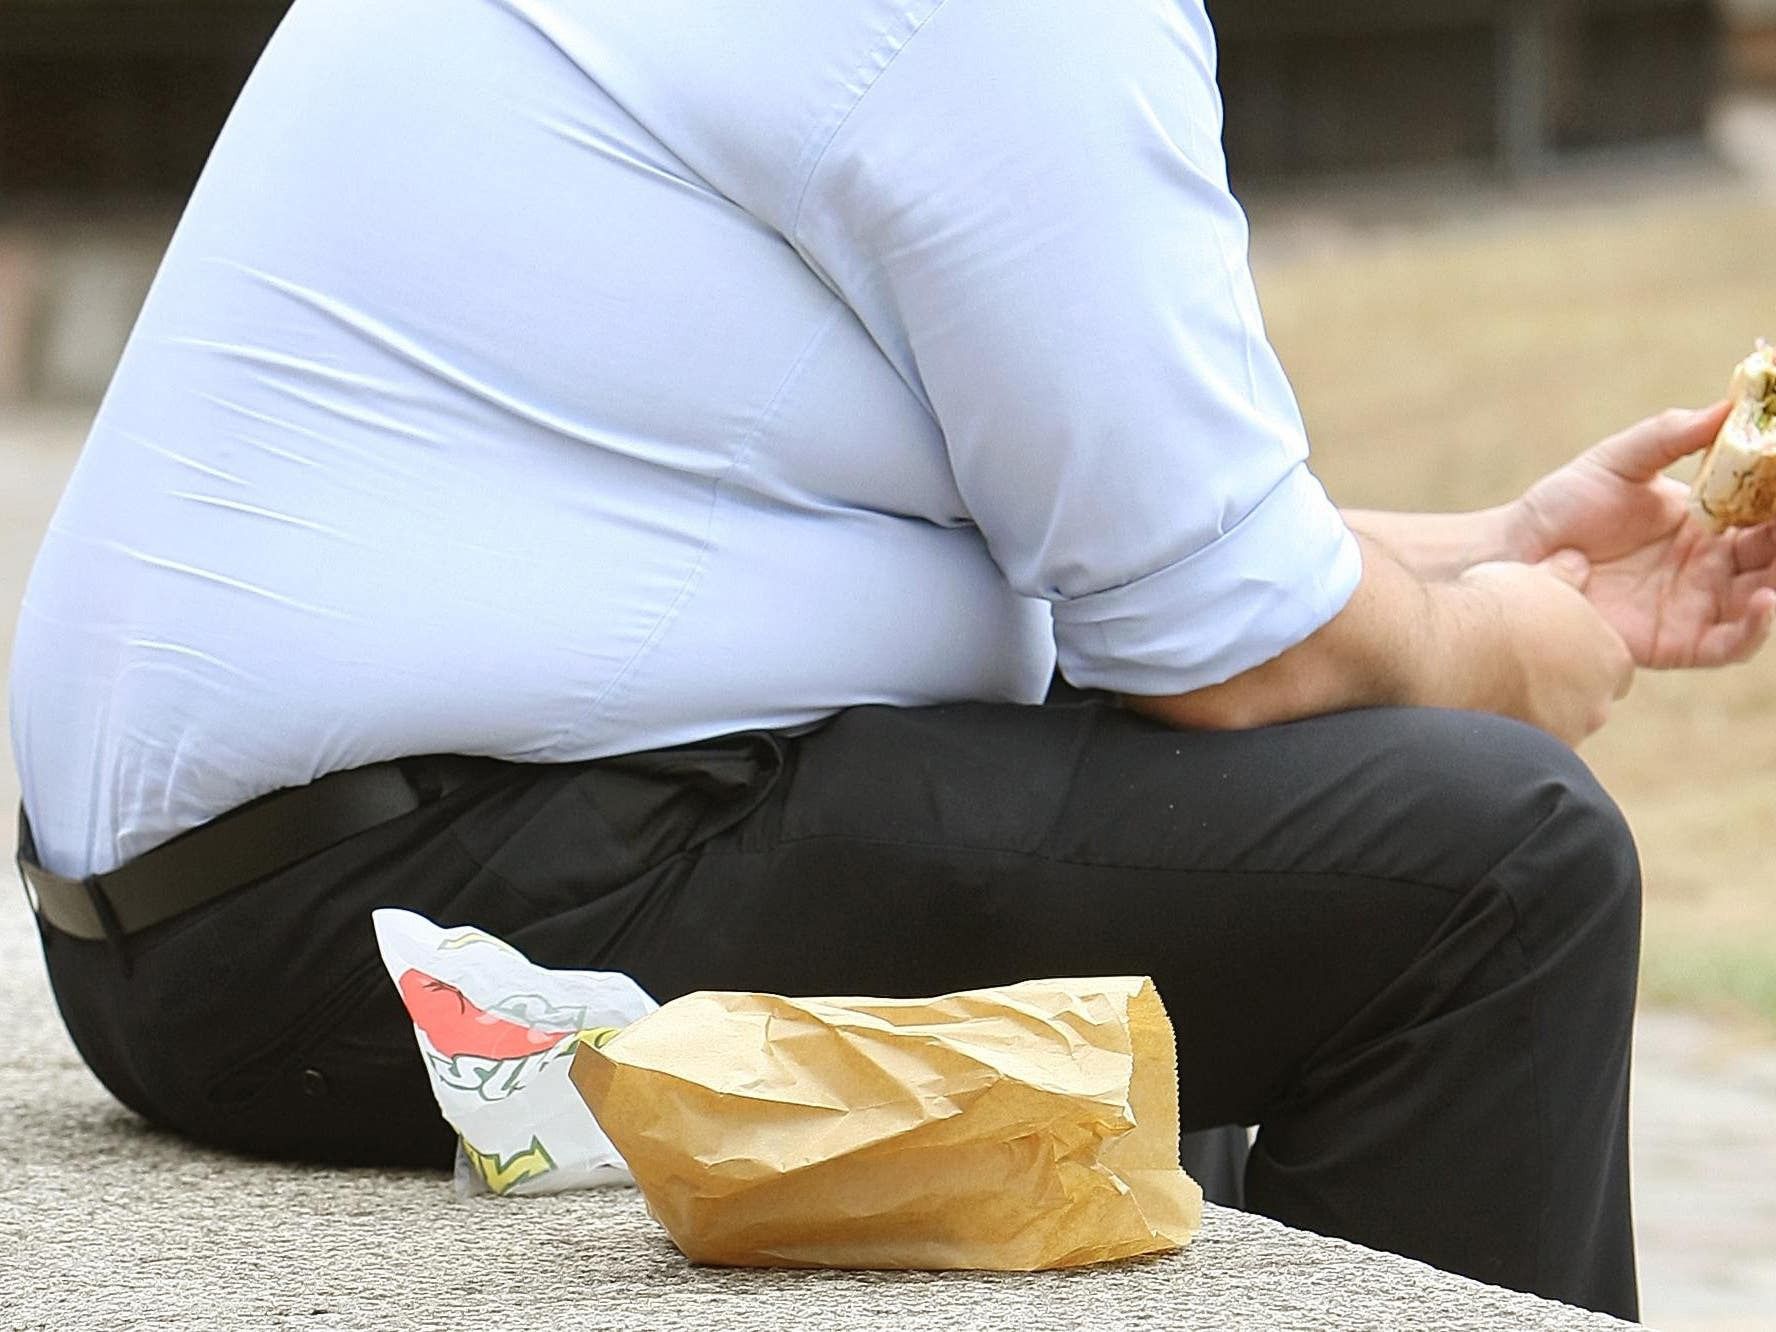 Overweight and obese people ‘more likely to gain weight when feeling depressed’